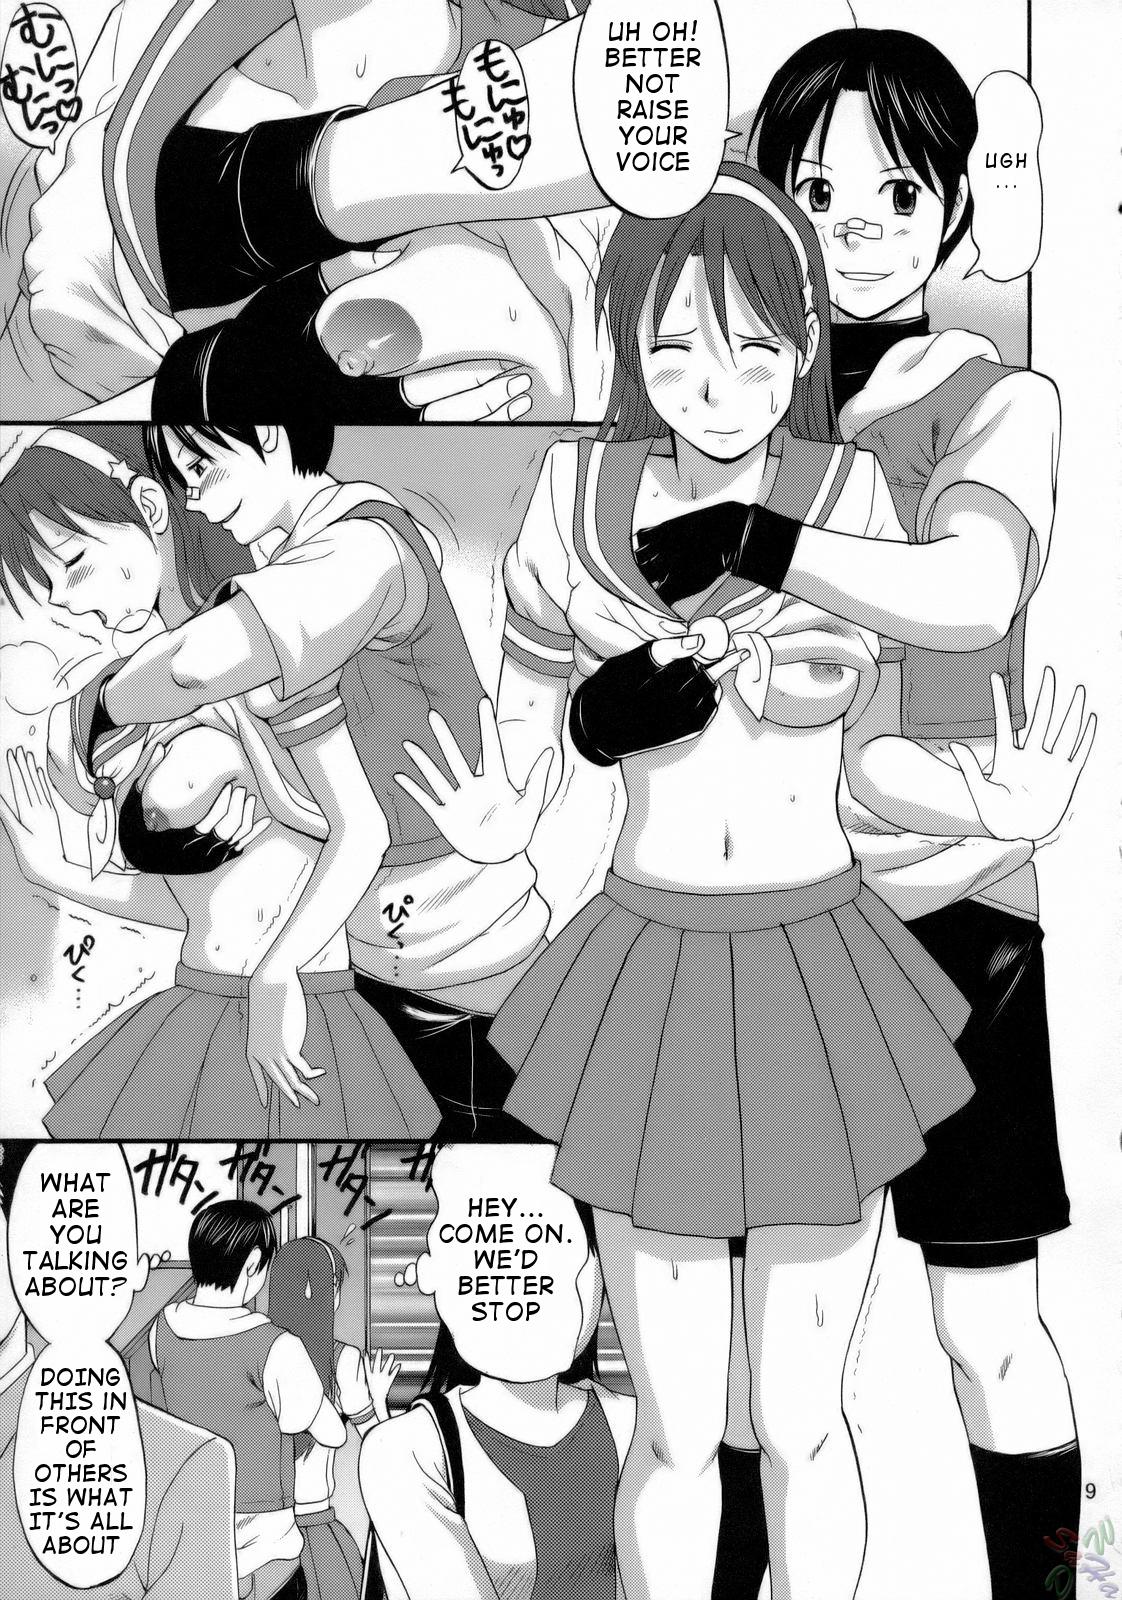 Realsex THE ATHENA & FRIENDS 2006 - King of fighters Sub - Page 8